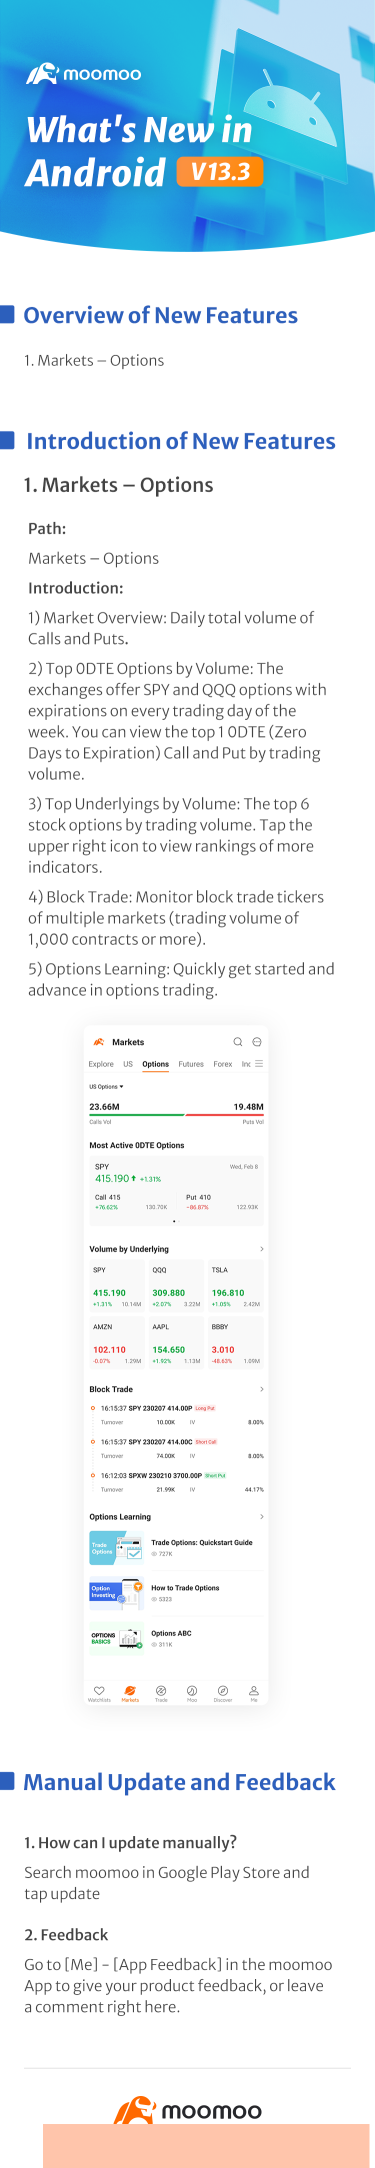 What's New: Options Tab available in Android v13.3